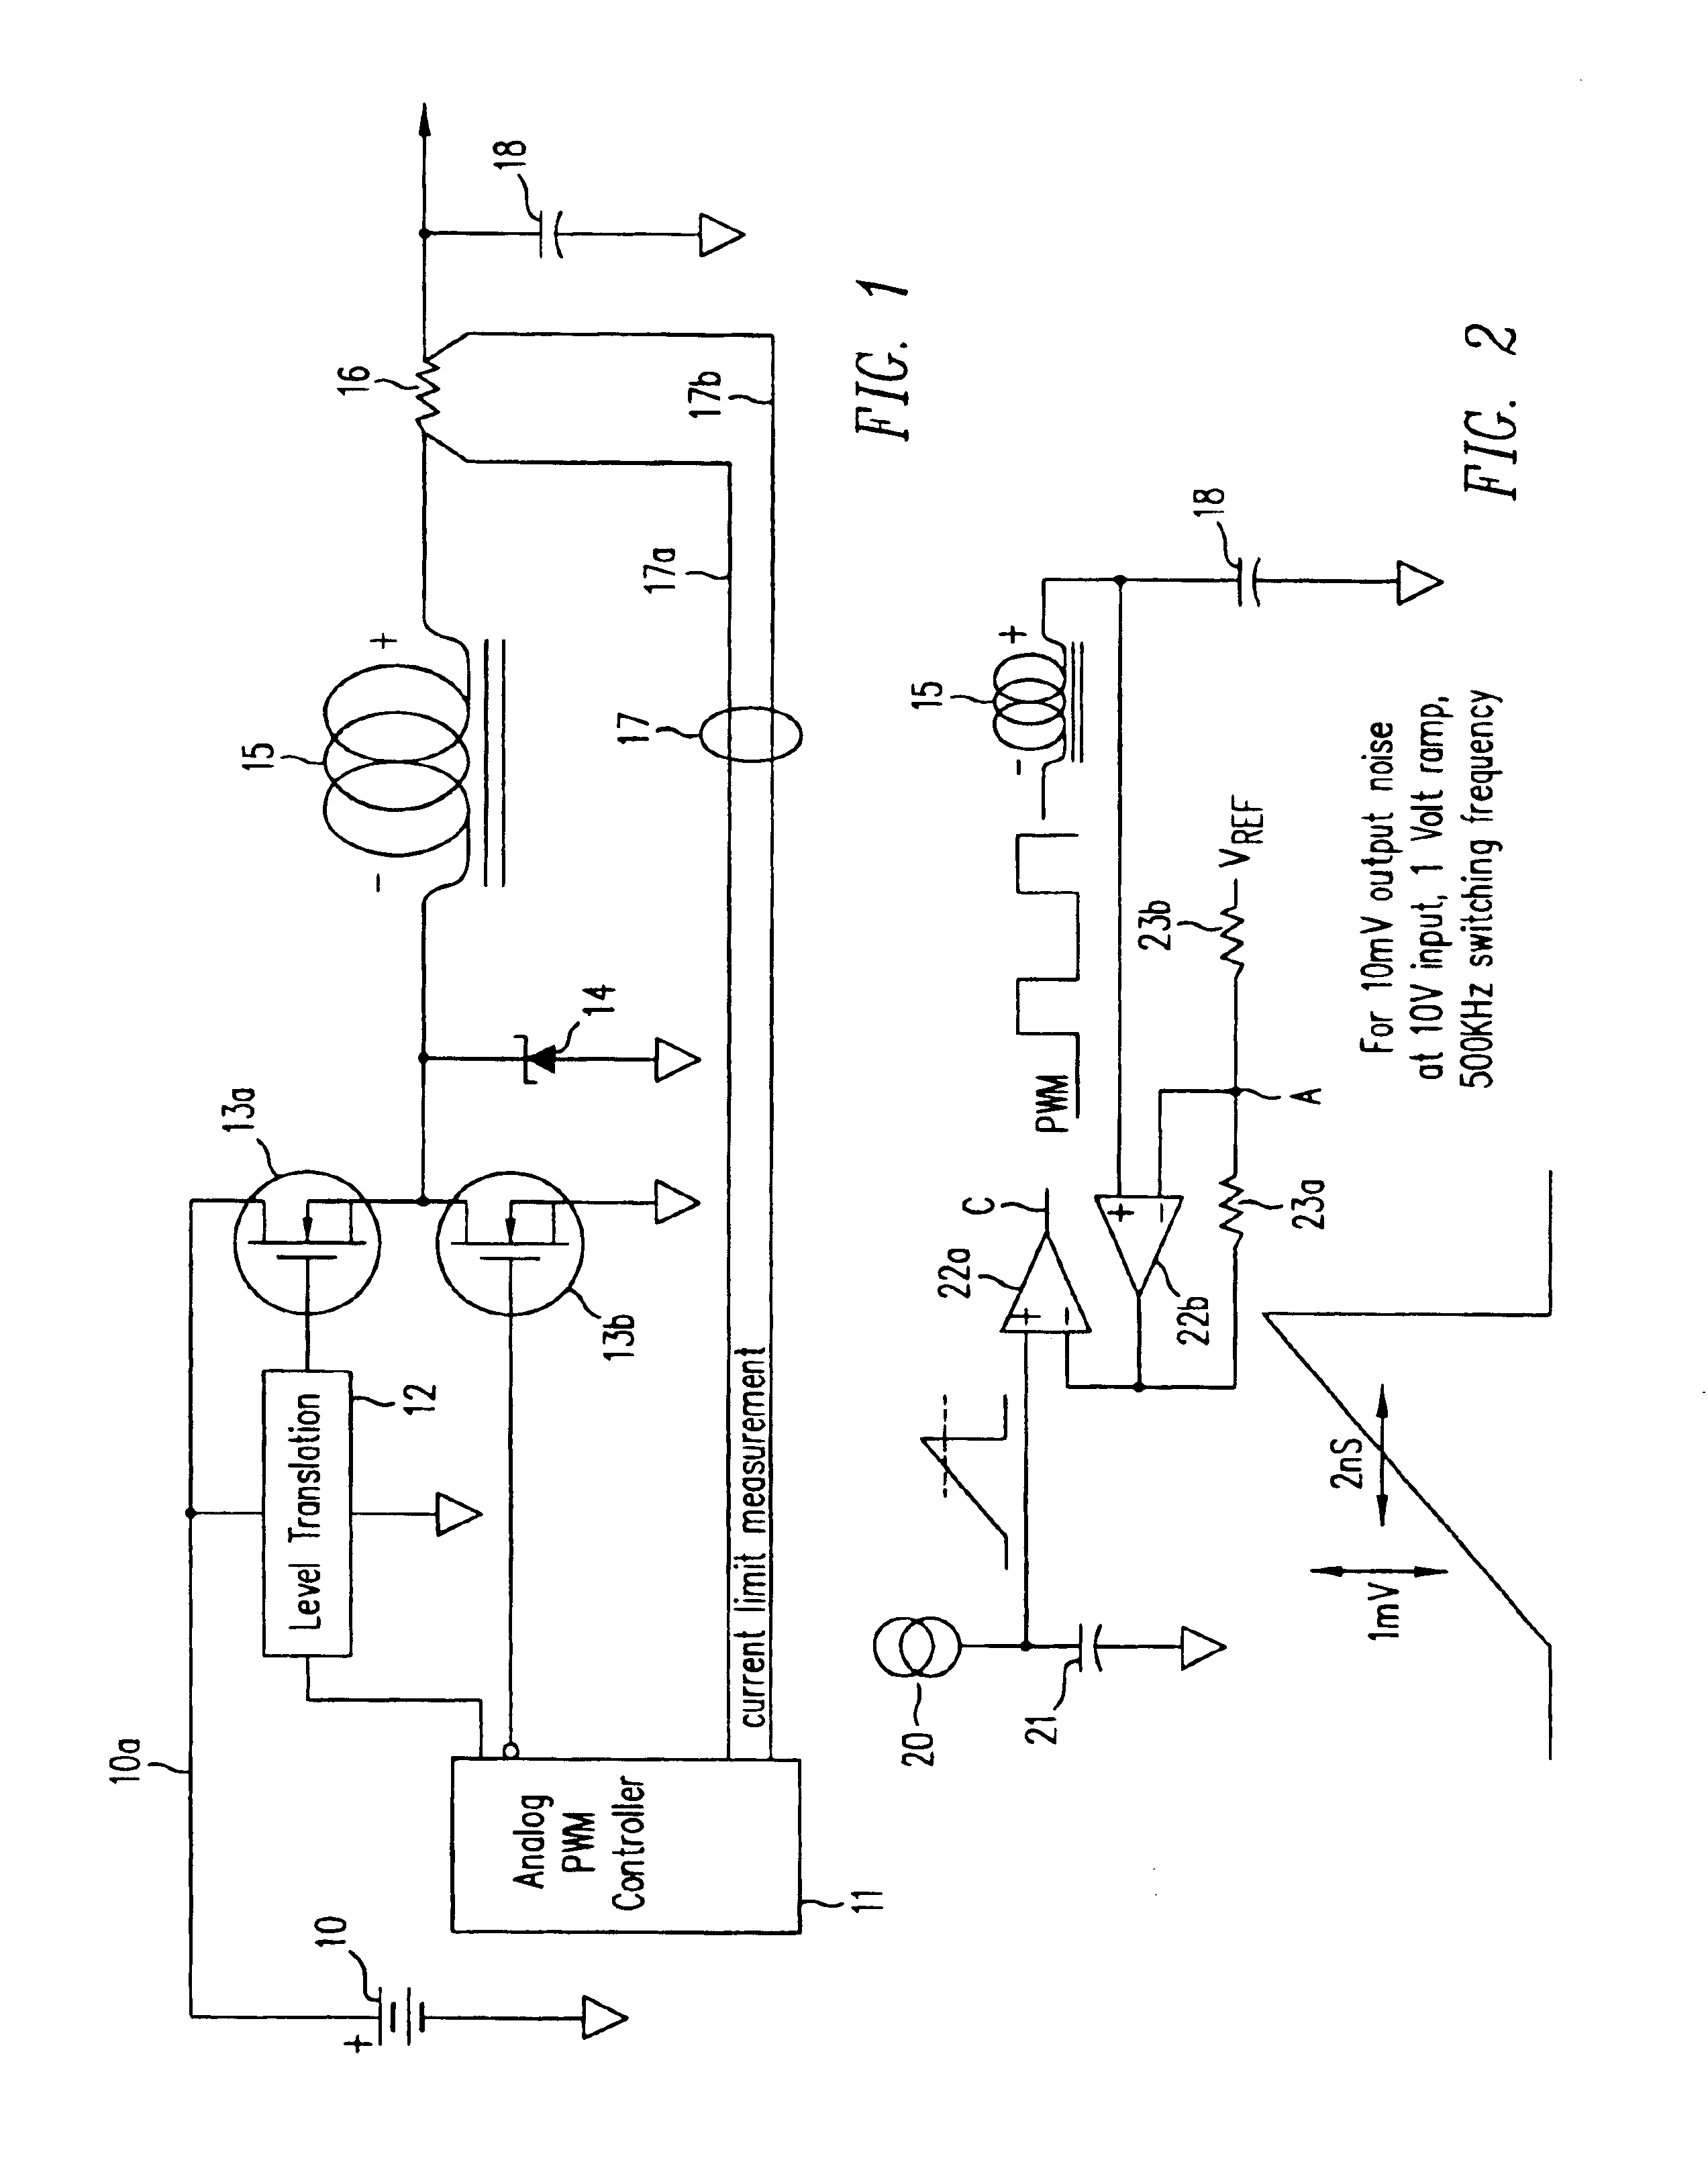 Method for regulating an output voltage of a power coverter